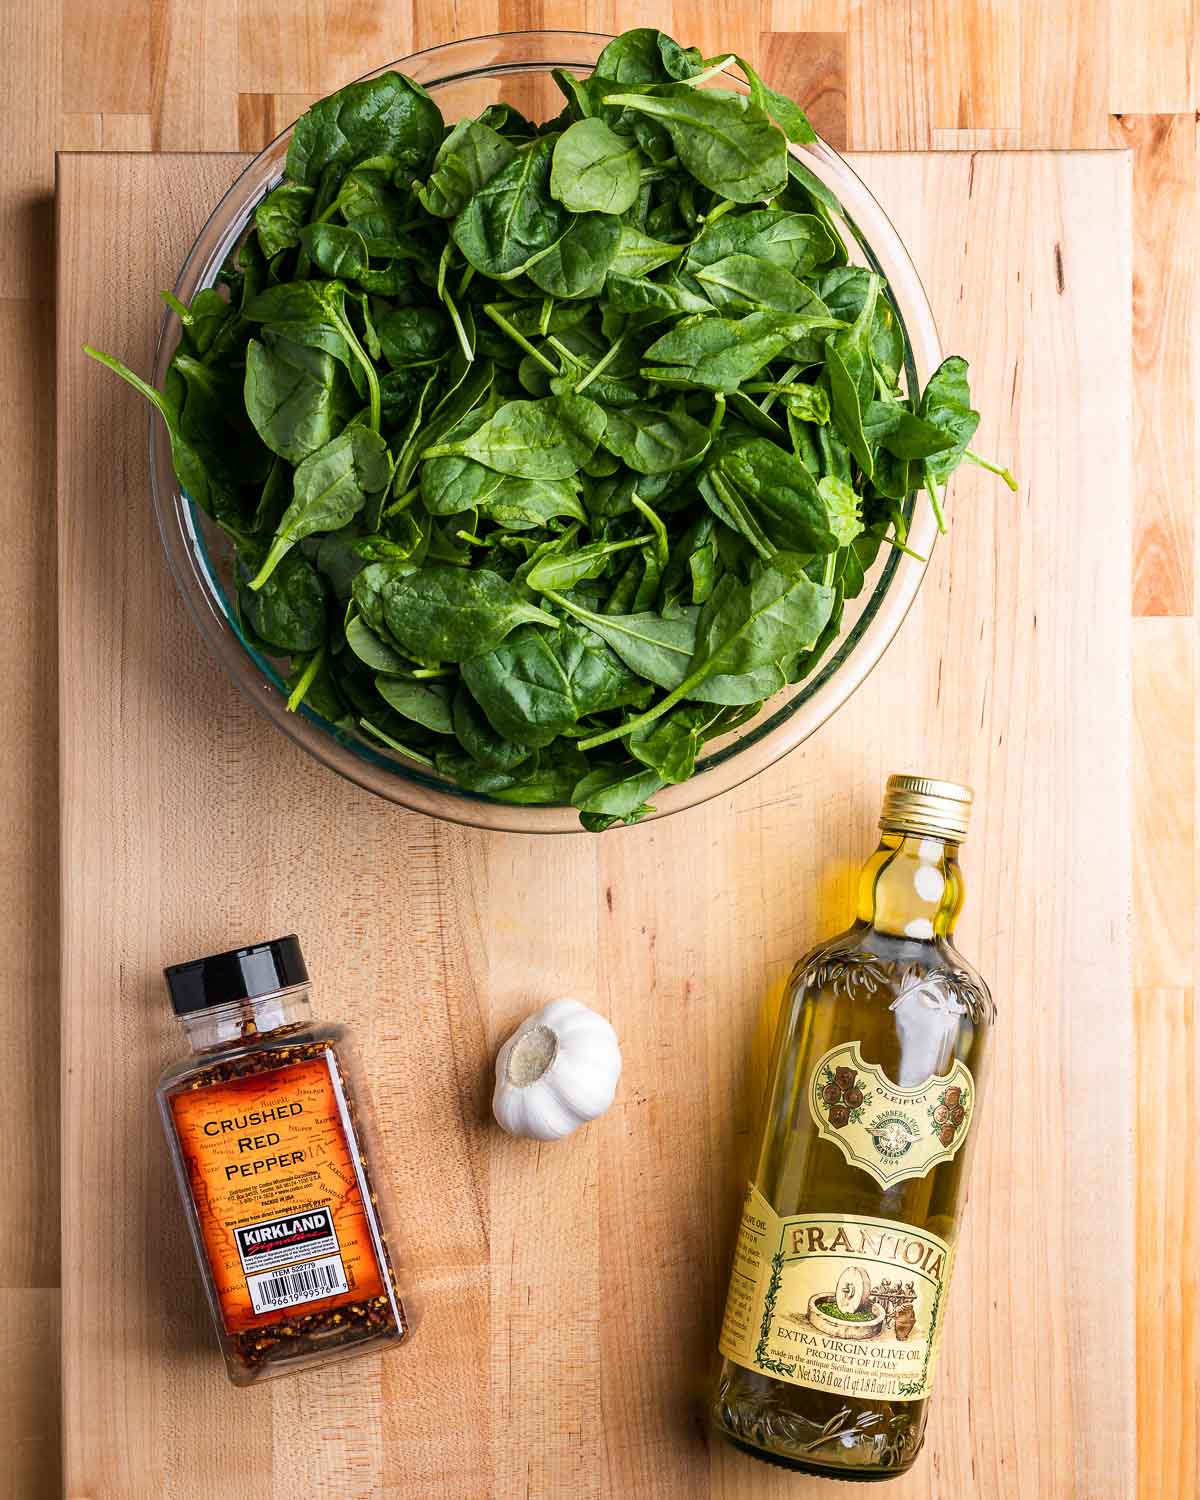 Ingredients shown: bowl of spinach, olive oil, garlic, and hot red pepper flakes.